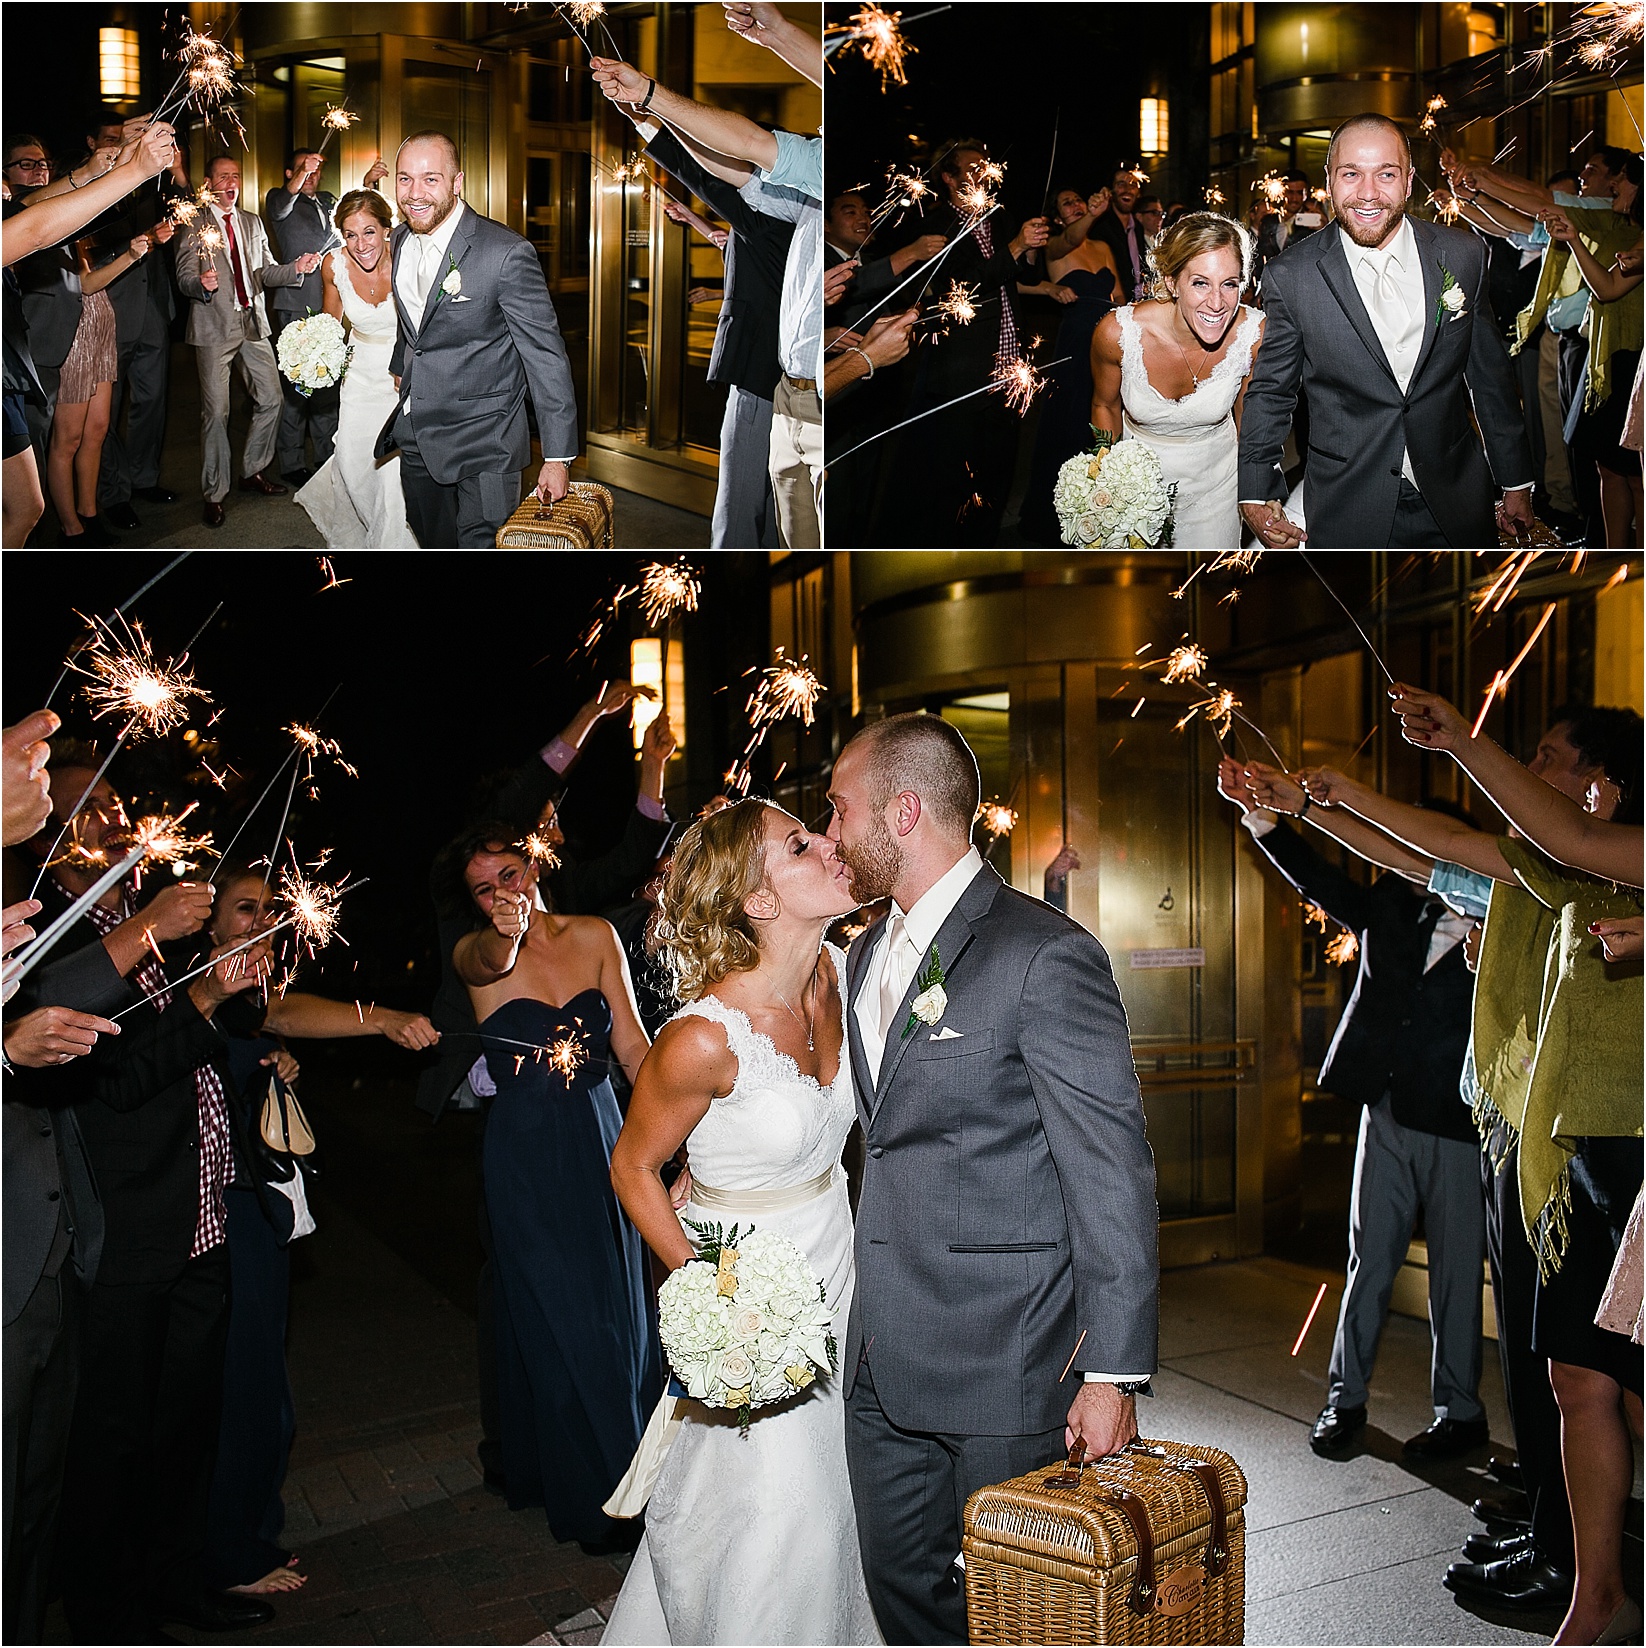 Grand Sparkler exit while leaving the reception at the Charlotte City Club wedding in charlotte North Carolina